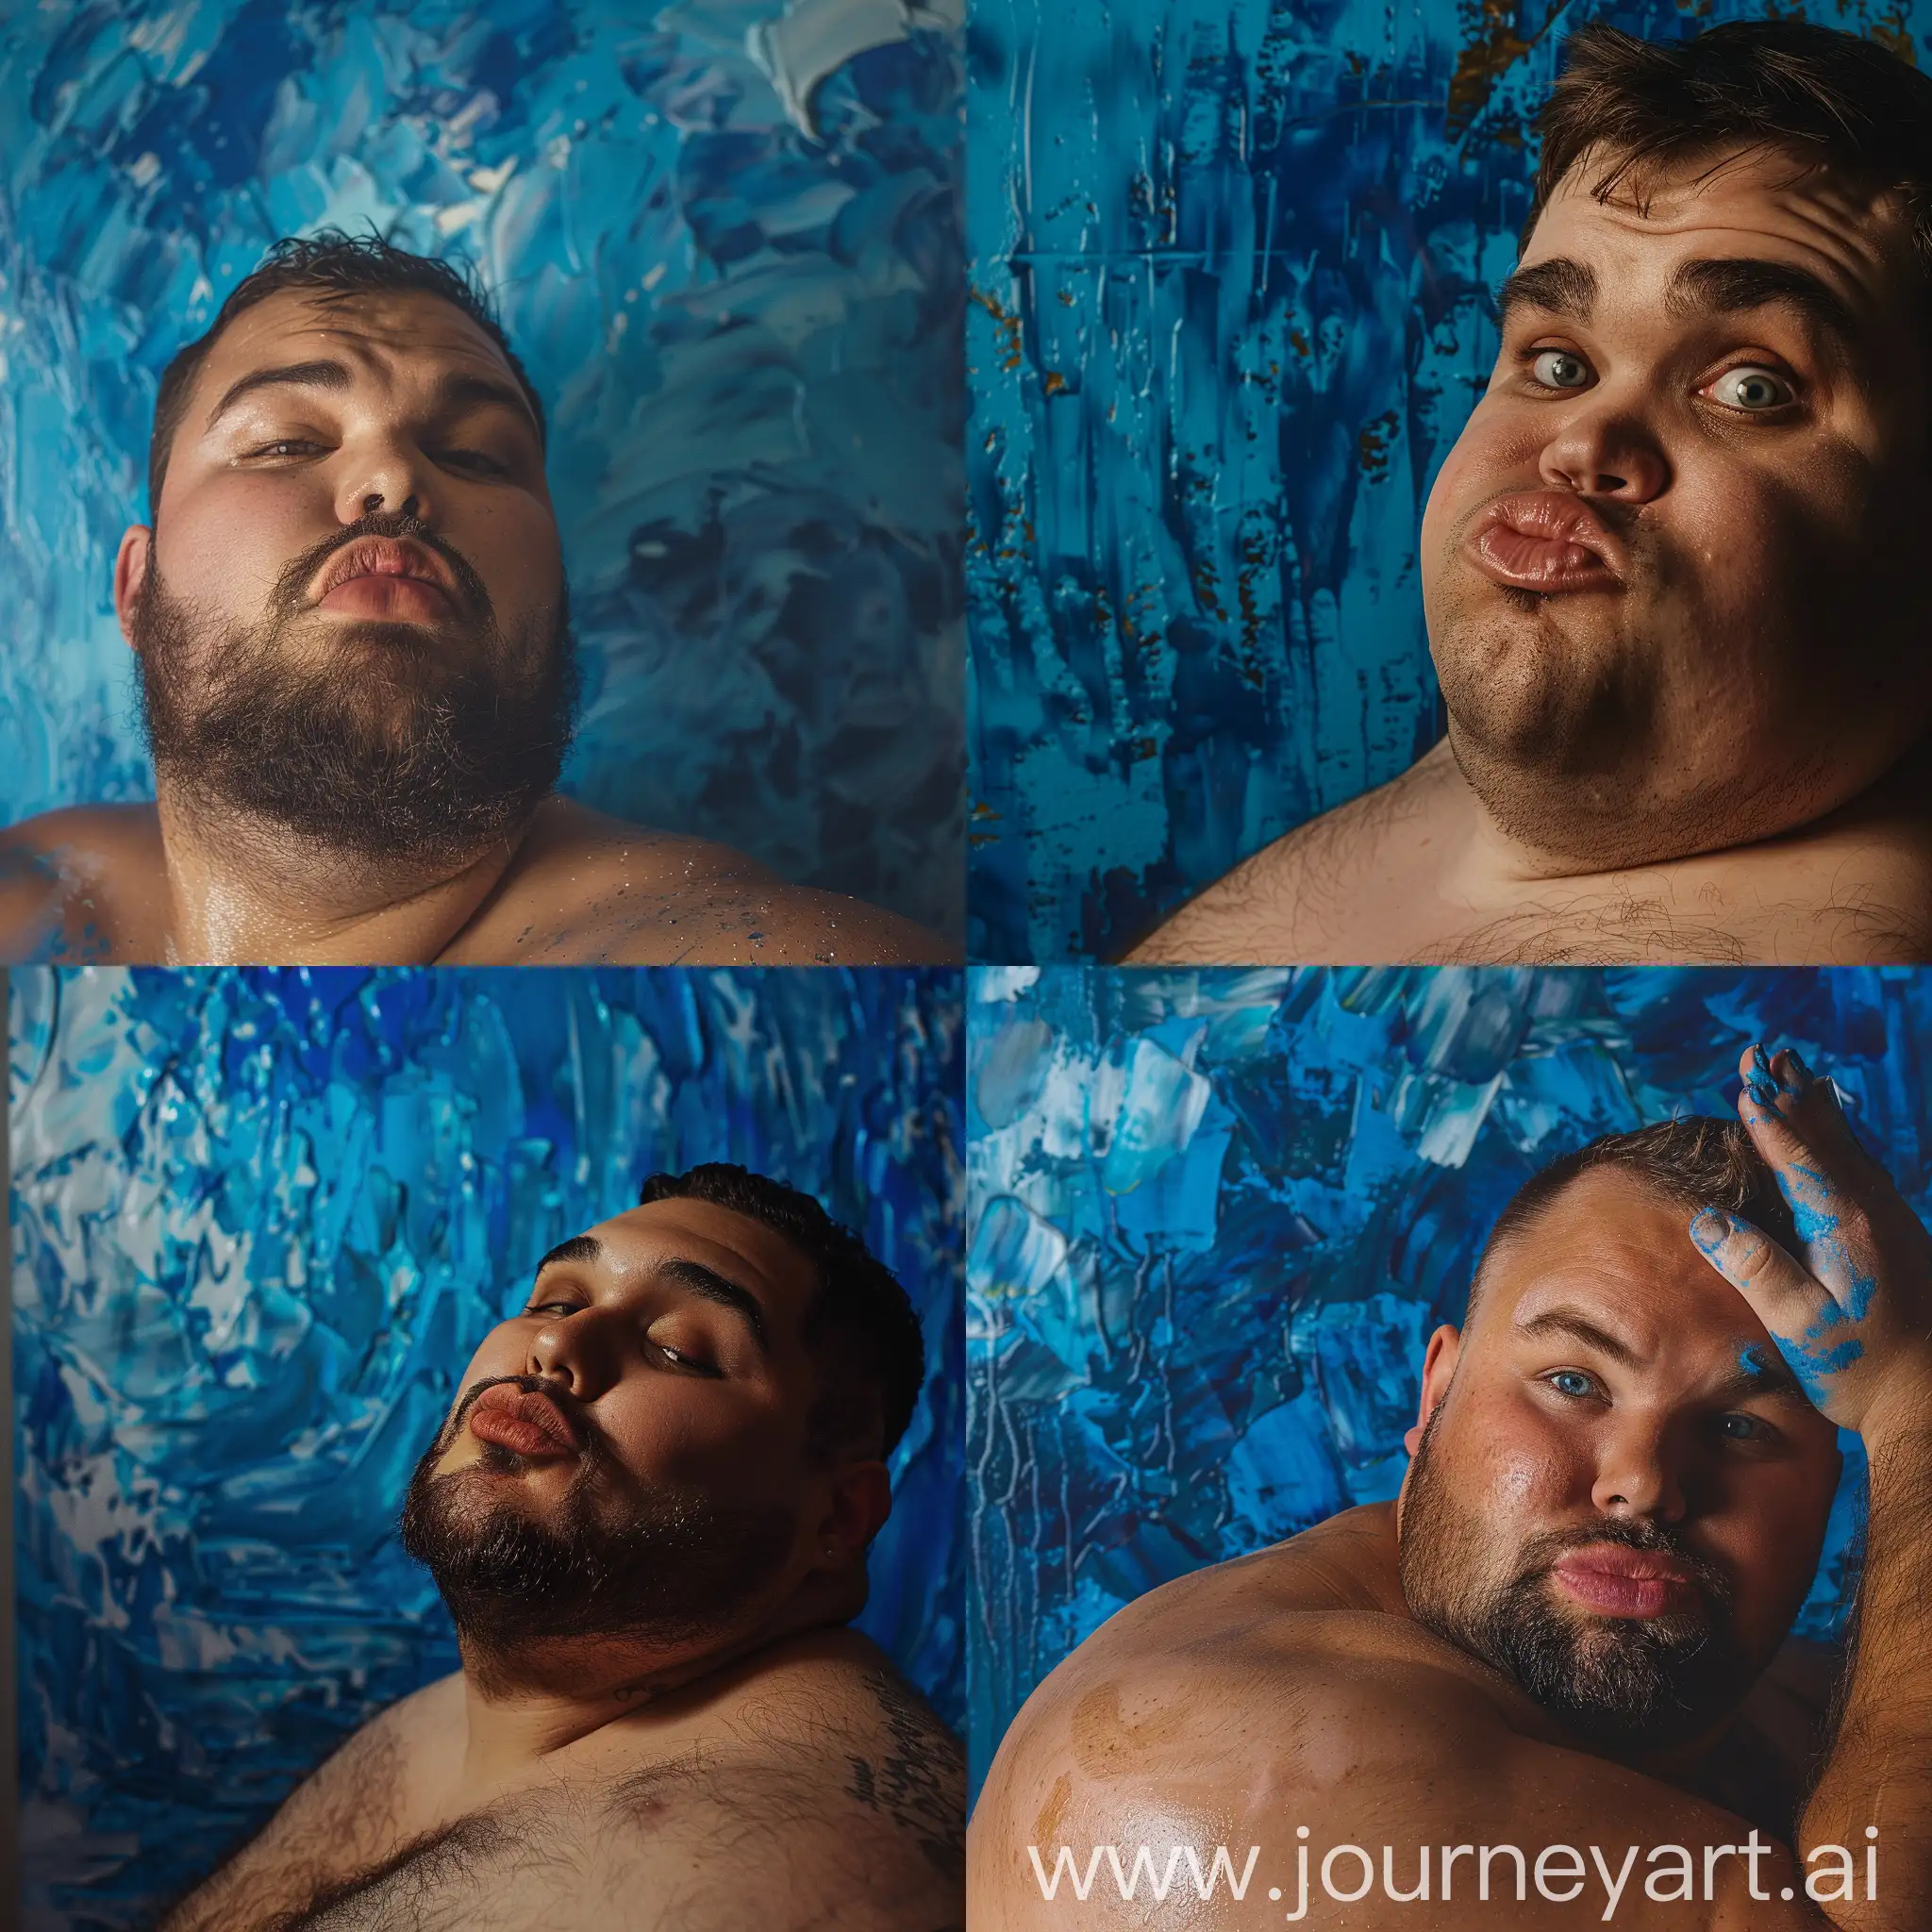 Closeup portrait photo of a gorgeous fat man with cupid's bow lips, posing in front of a blue painting